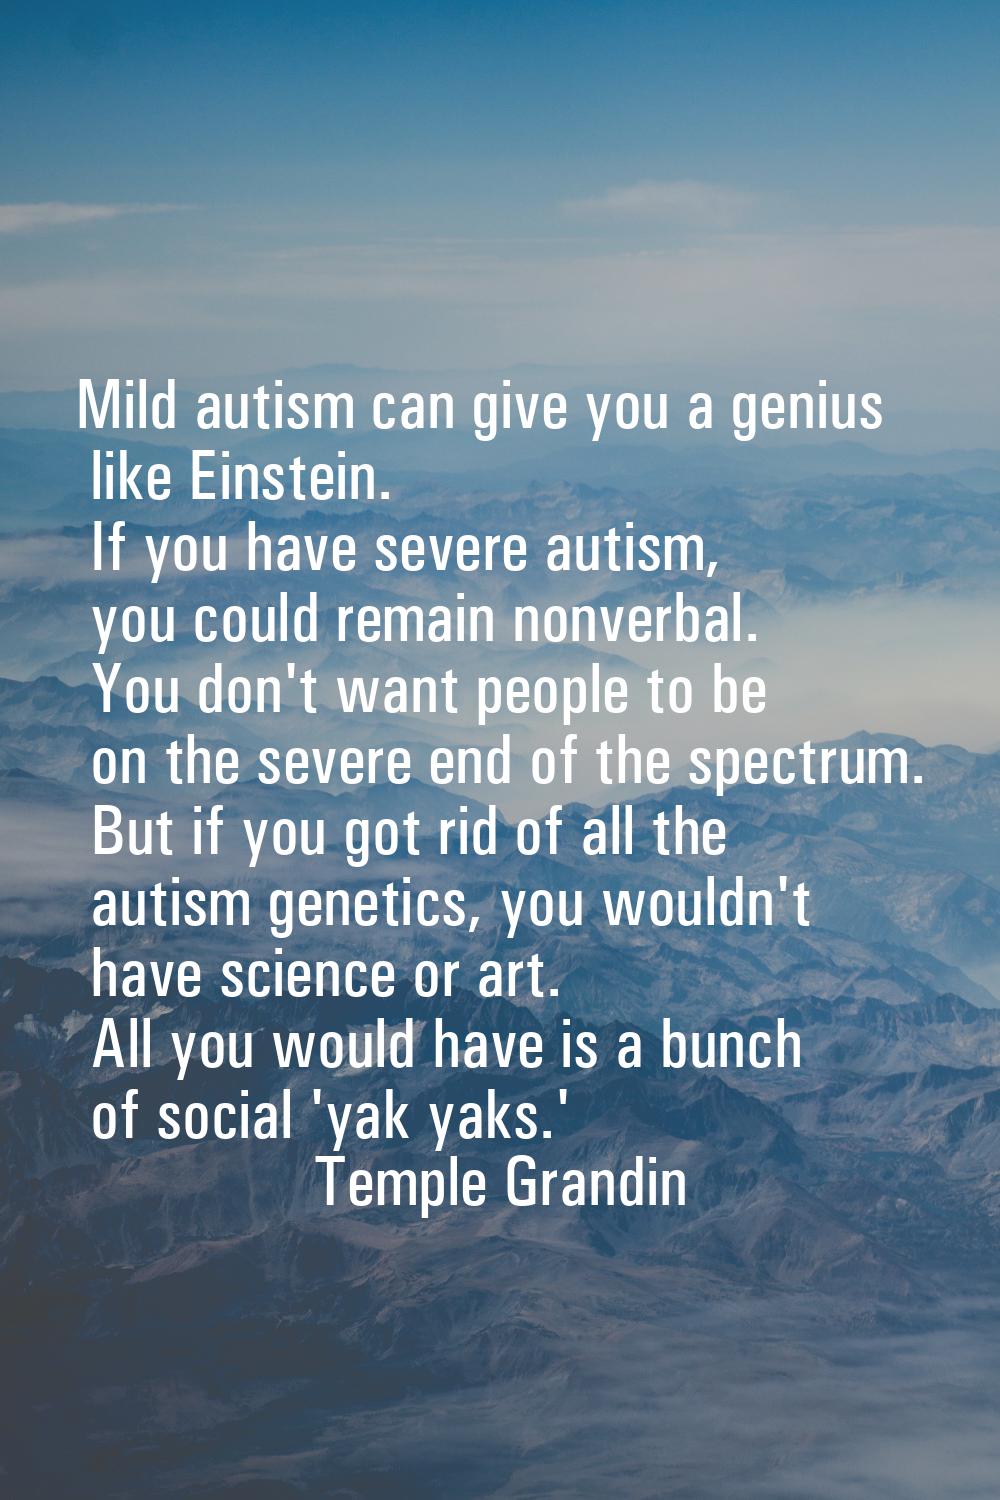 Mild autism can give you a genius like Einstein. If you have severe autism, you could remain nonver